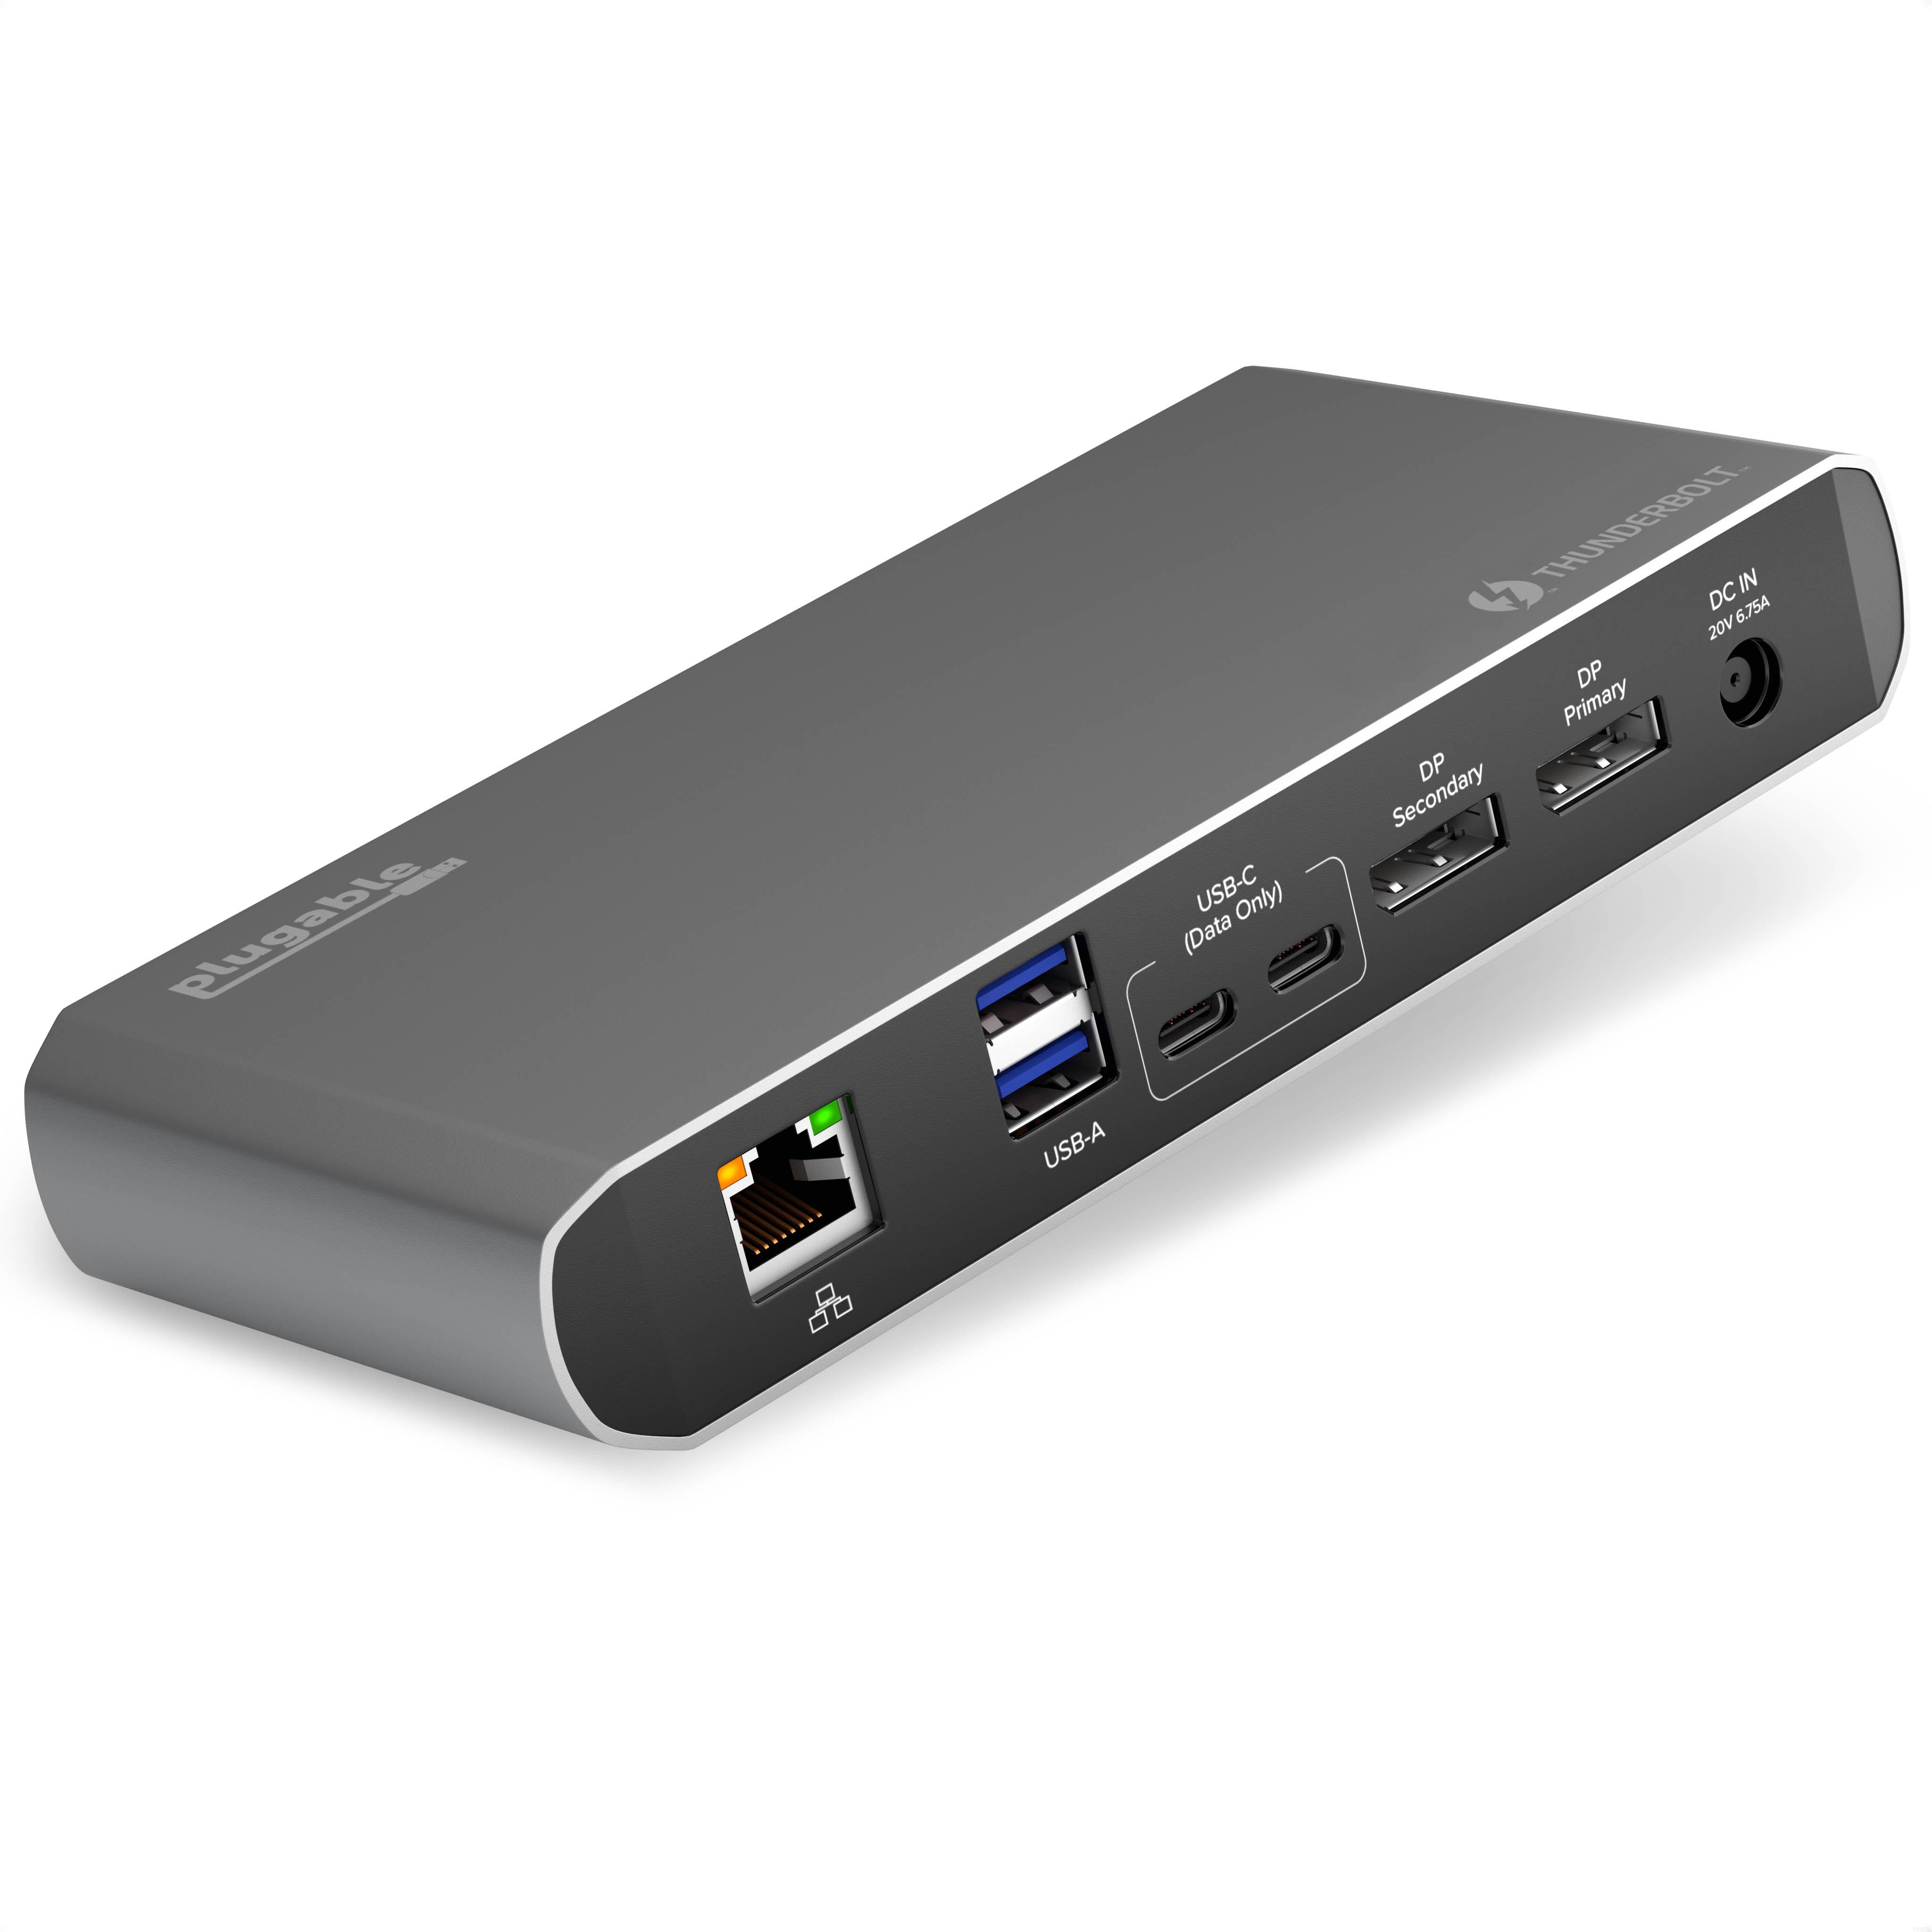 Plugable Thunderbolt 3 and USB C Dock with 60W Charging, Compatible with MacBook / MacBook Pro and Windows, Dual DisplayPort or HDMI with Included Adapter, 2x USB-C, 3x USB 3.0, Gigabit Ethernet - image 1 of 7